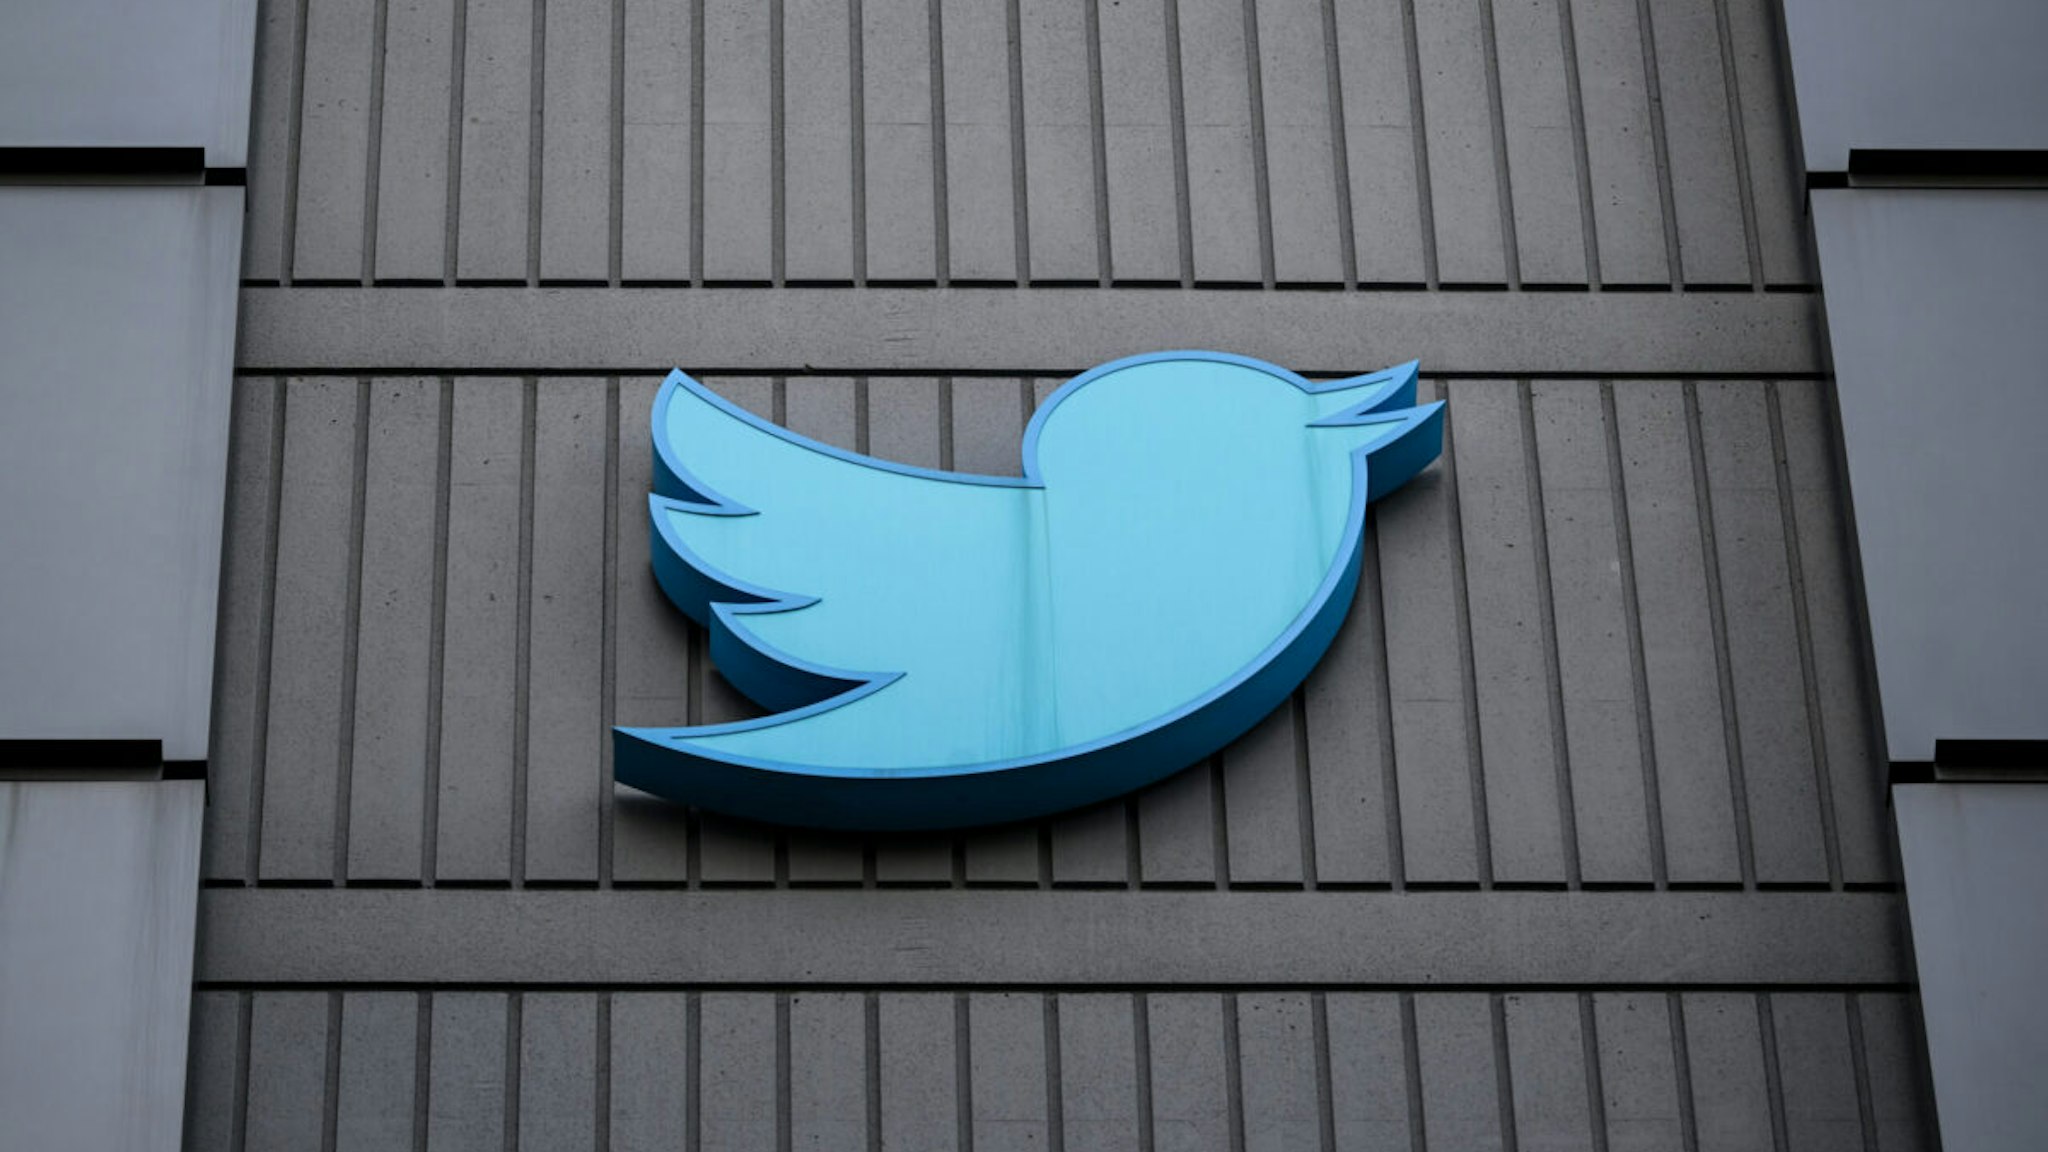 SAN FRANCISCO, CA FEBRUARY 8: A view of Twitter's logo at Twitter Headquarters in San Francisco, California, United States on February 8, 2023.